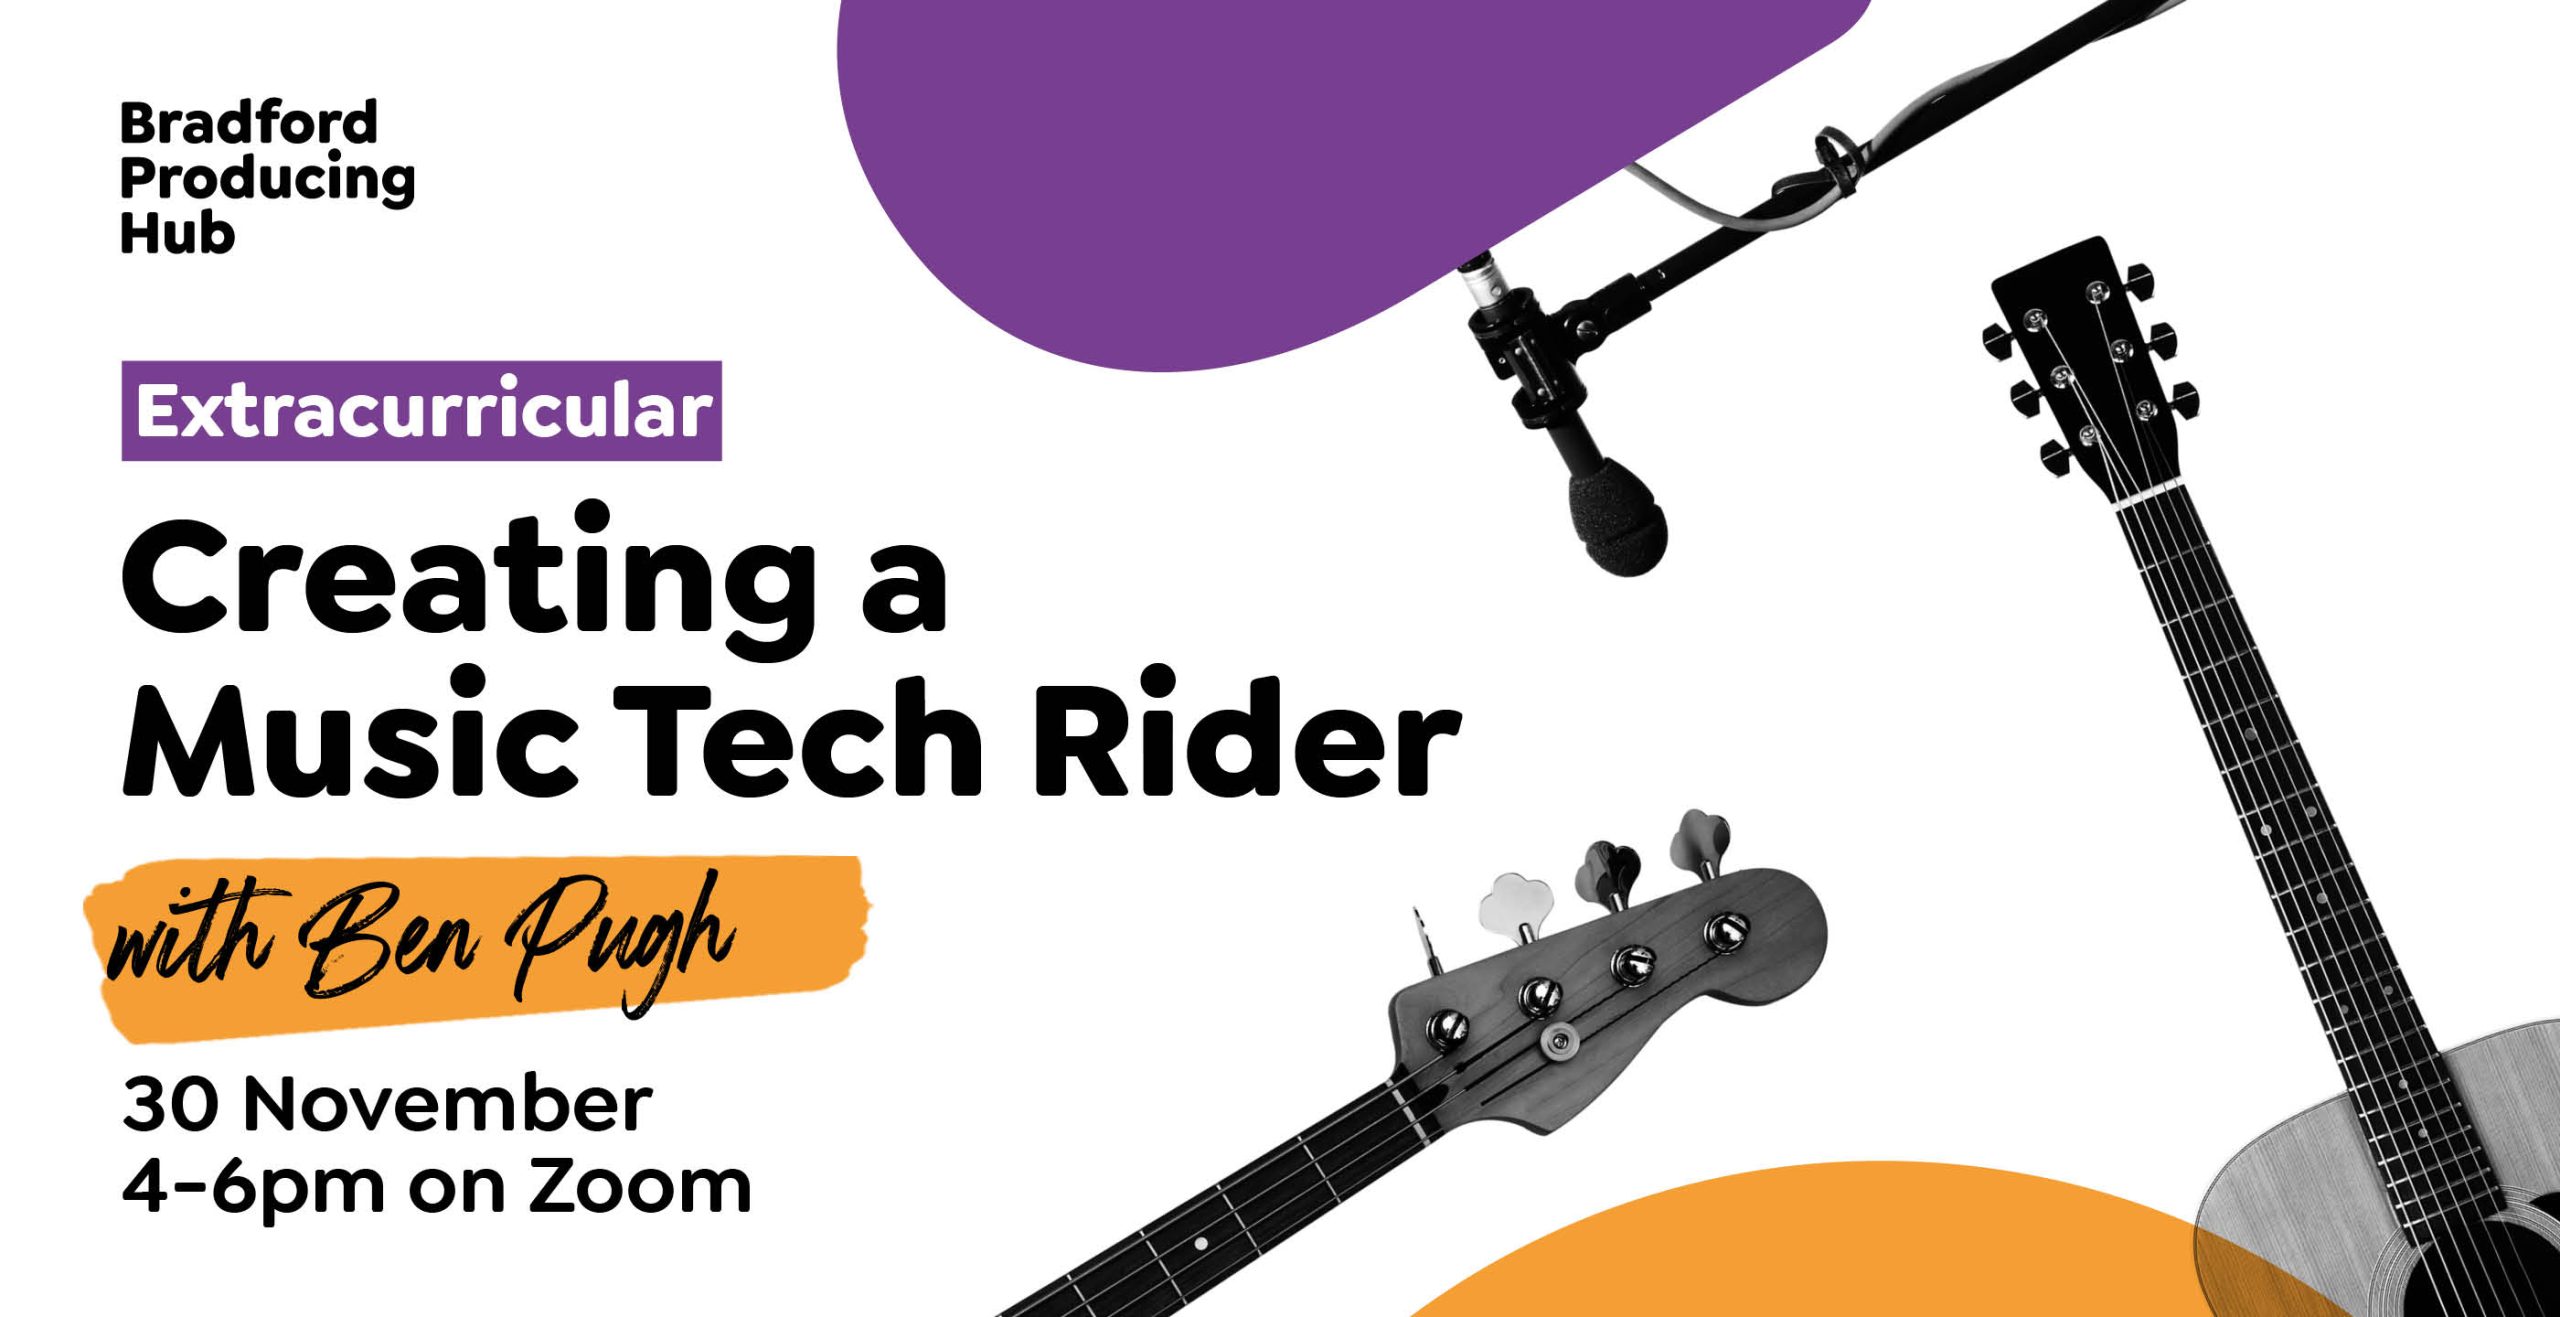 Extracurricular: Creating a Music Tech Rider with Ben Pugh, 30 November 4pm-6pm on Zoom